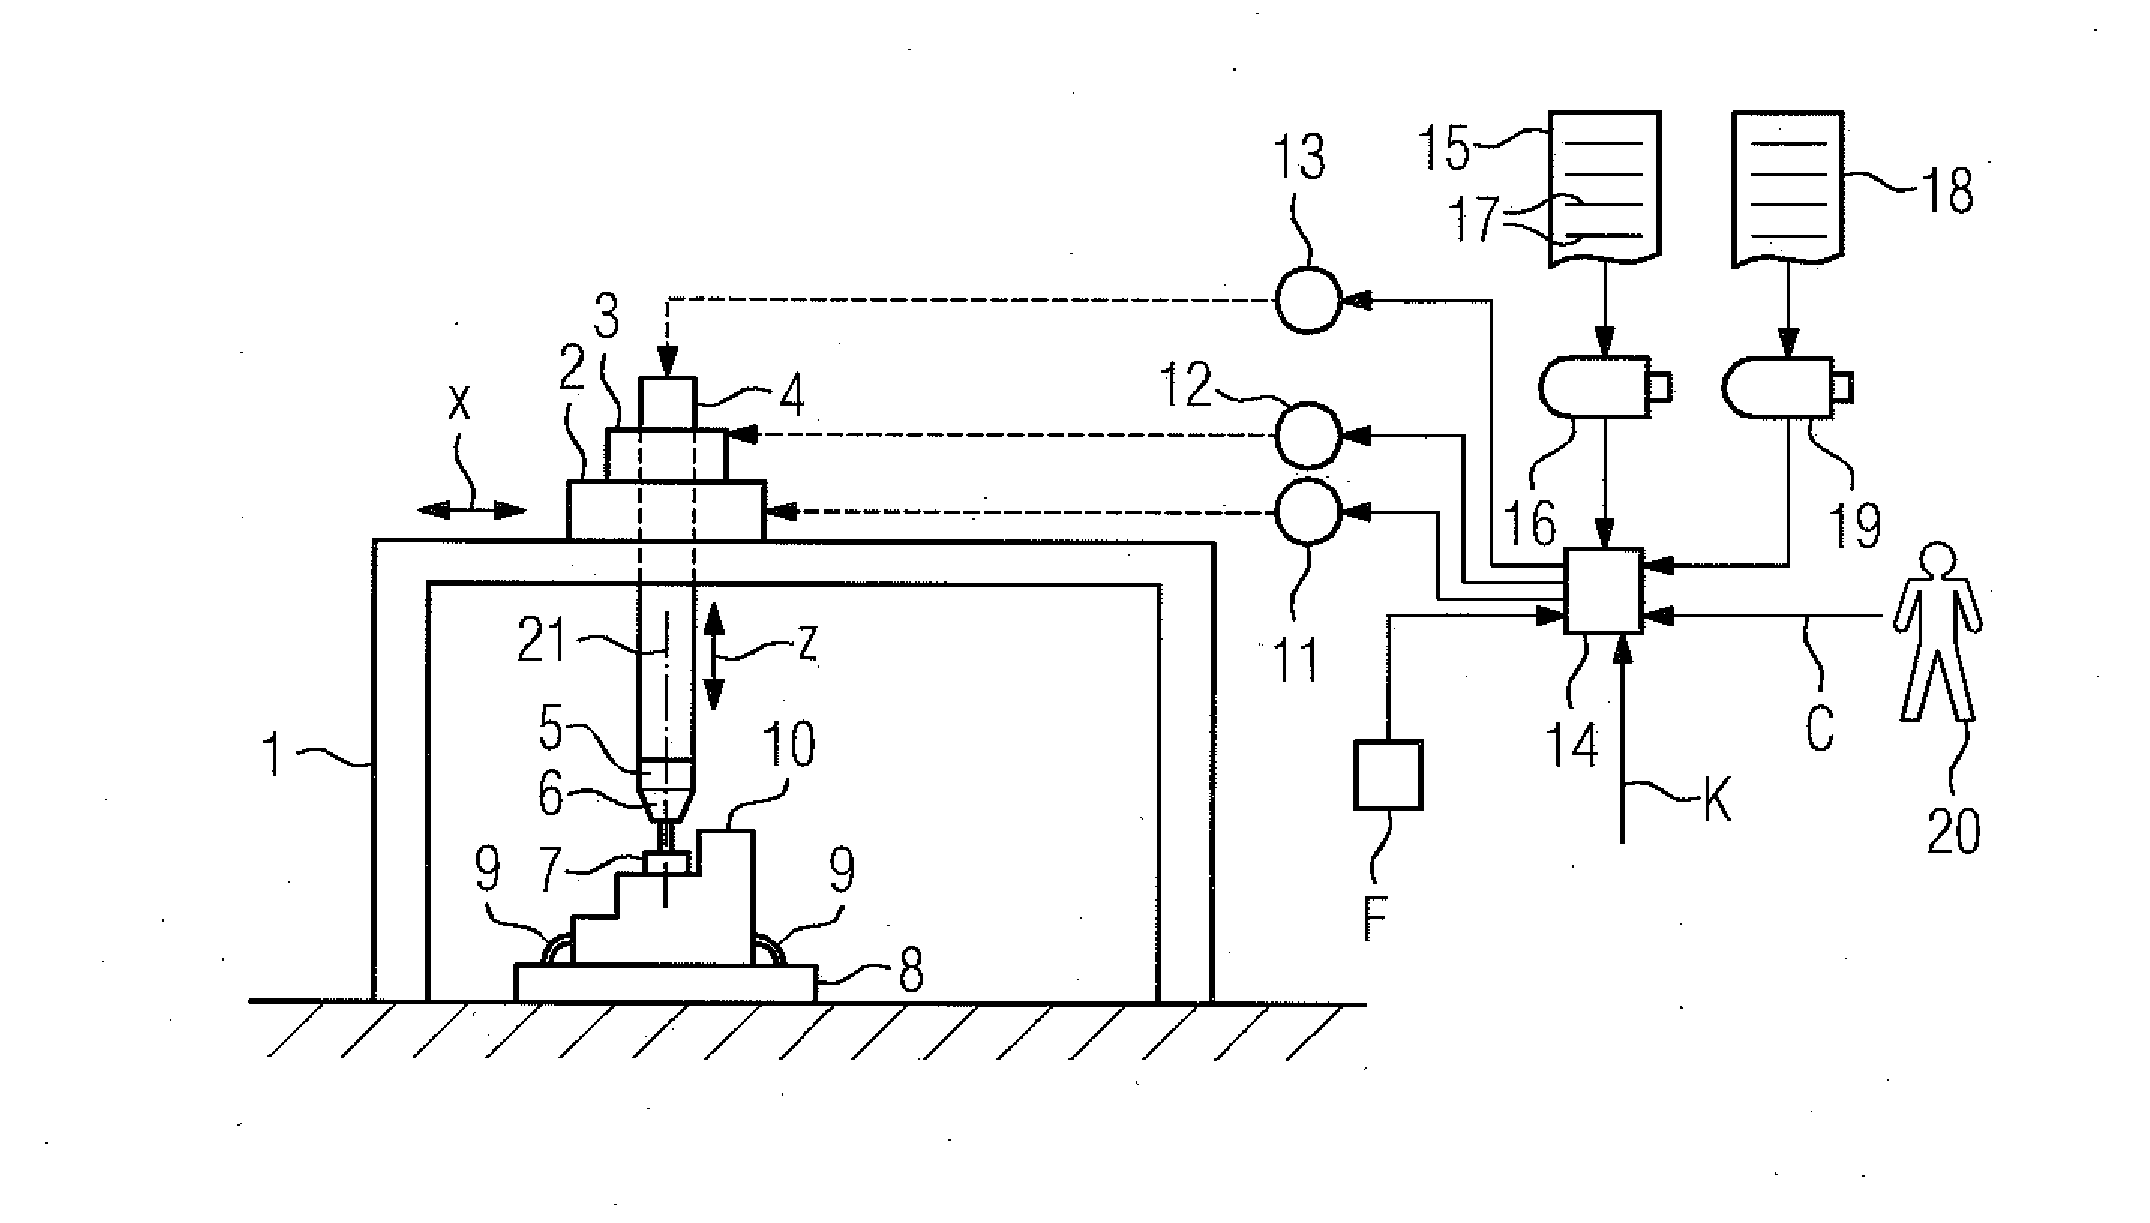 Processing machine which takes into account position errors during collision checking